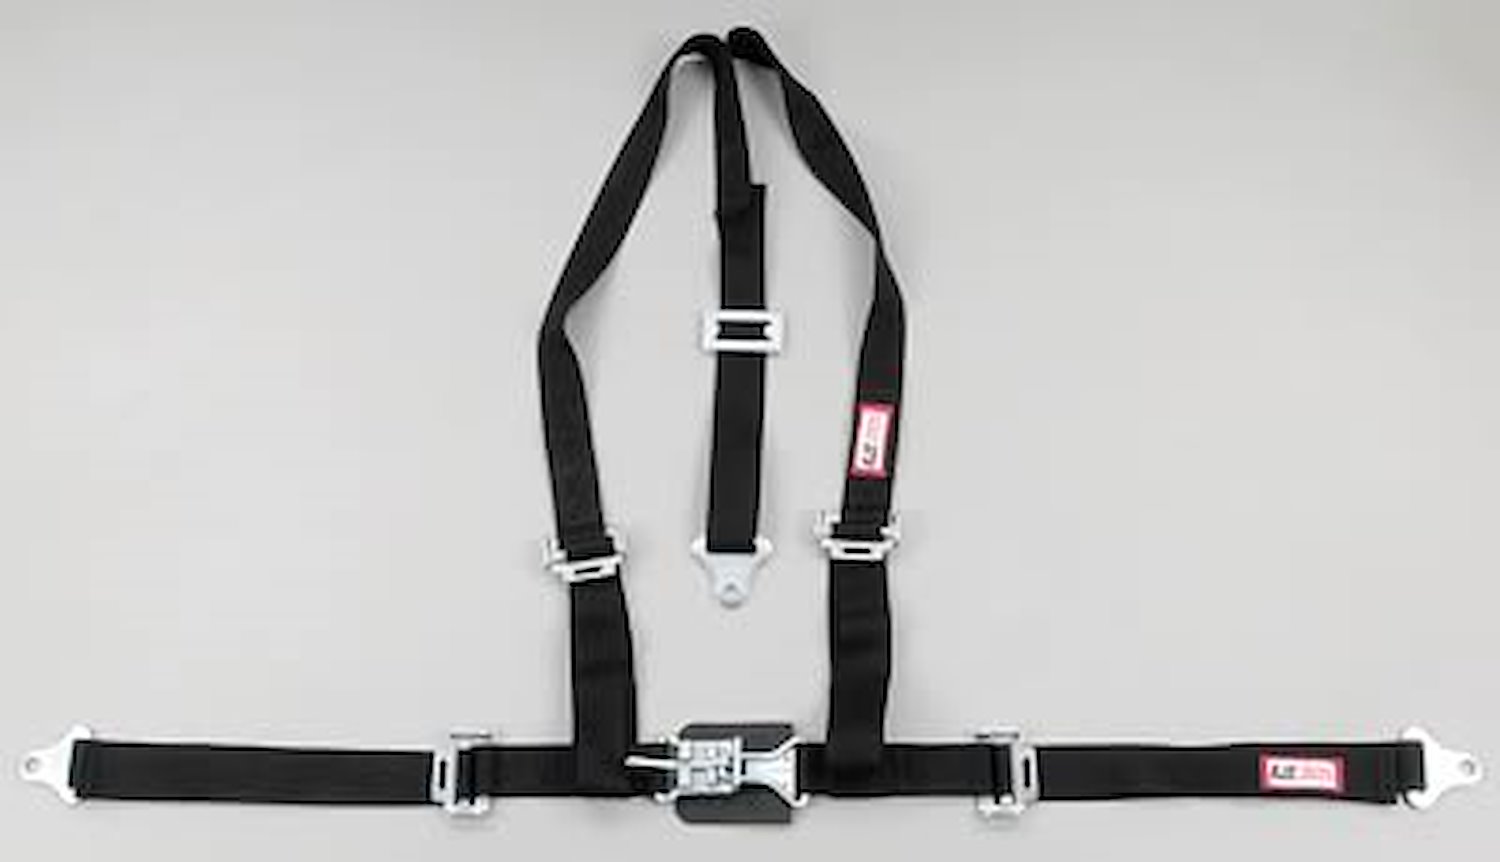 NON-SFI L&L HARNESS 3 PULL UP Lap Belt SEWN IN 2 S.H. Individual ROLL BAR Mount ALL WRAP ENDS GRAY